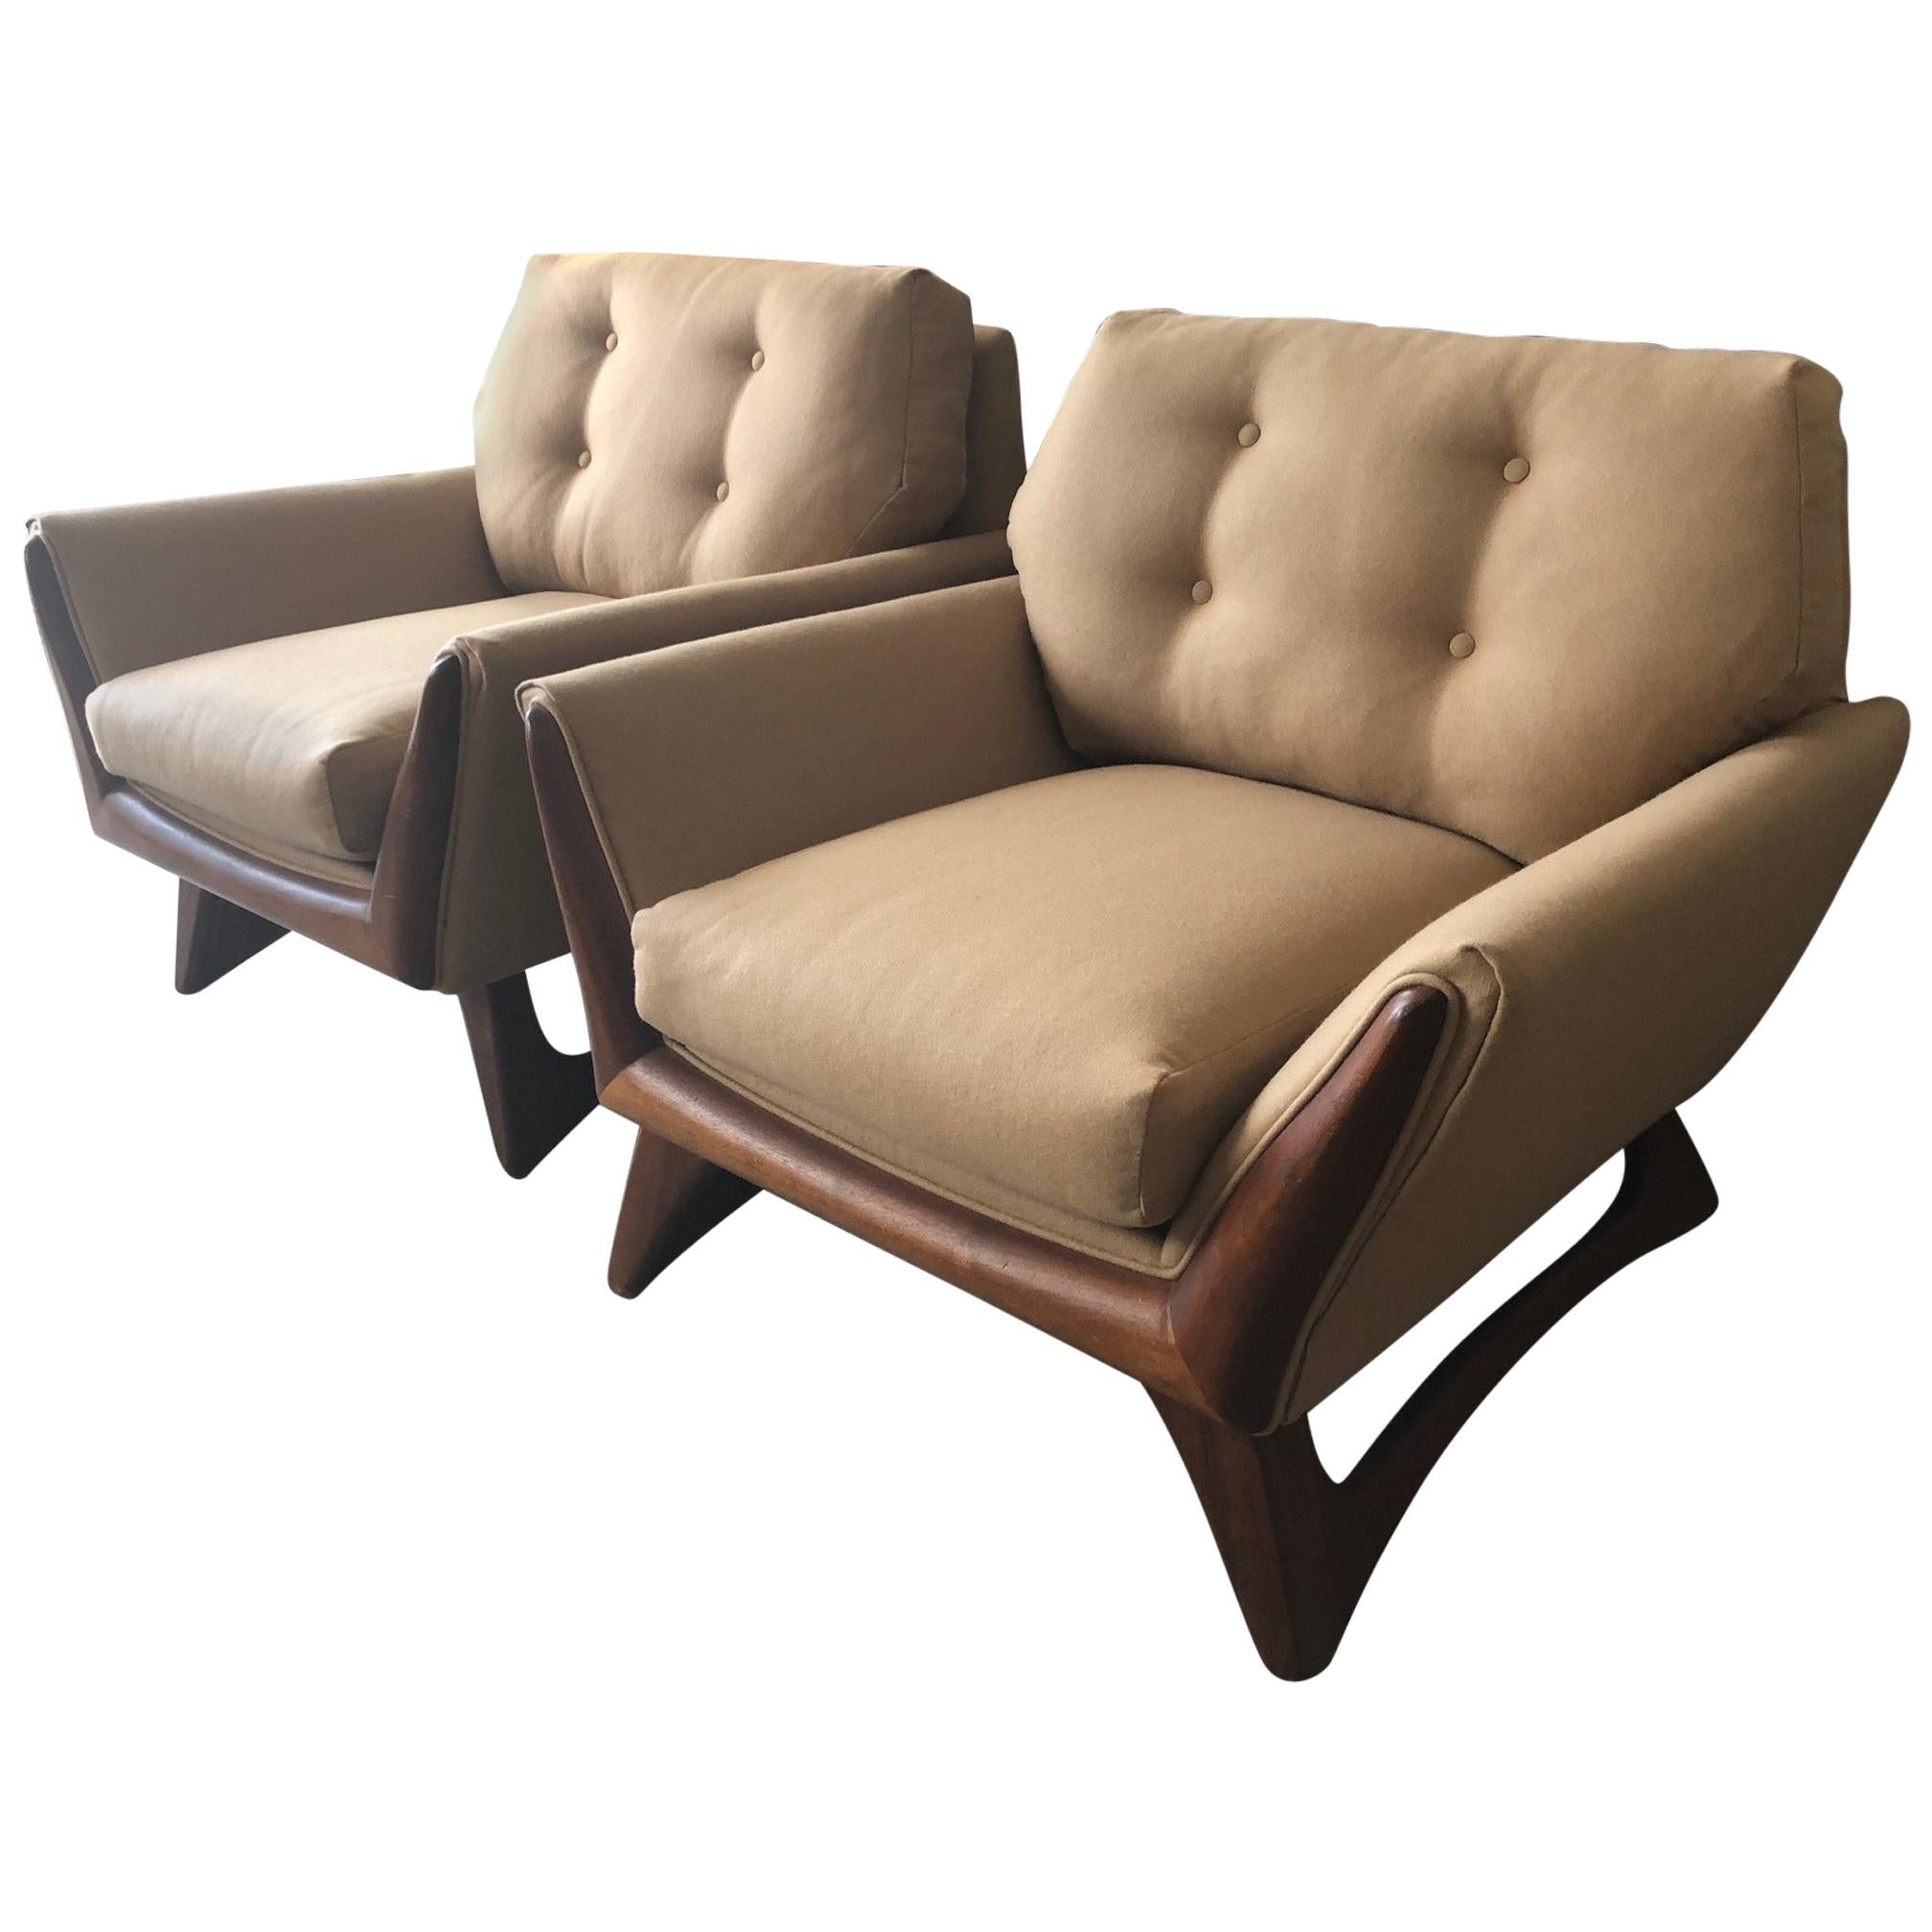 Pair of Adrian Pearsall Armchairs for Craft Associates